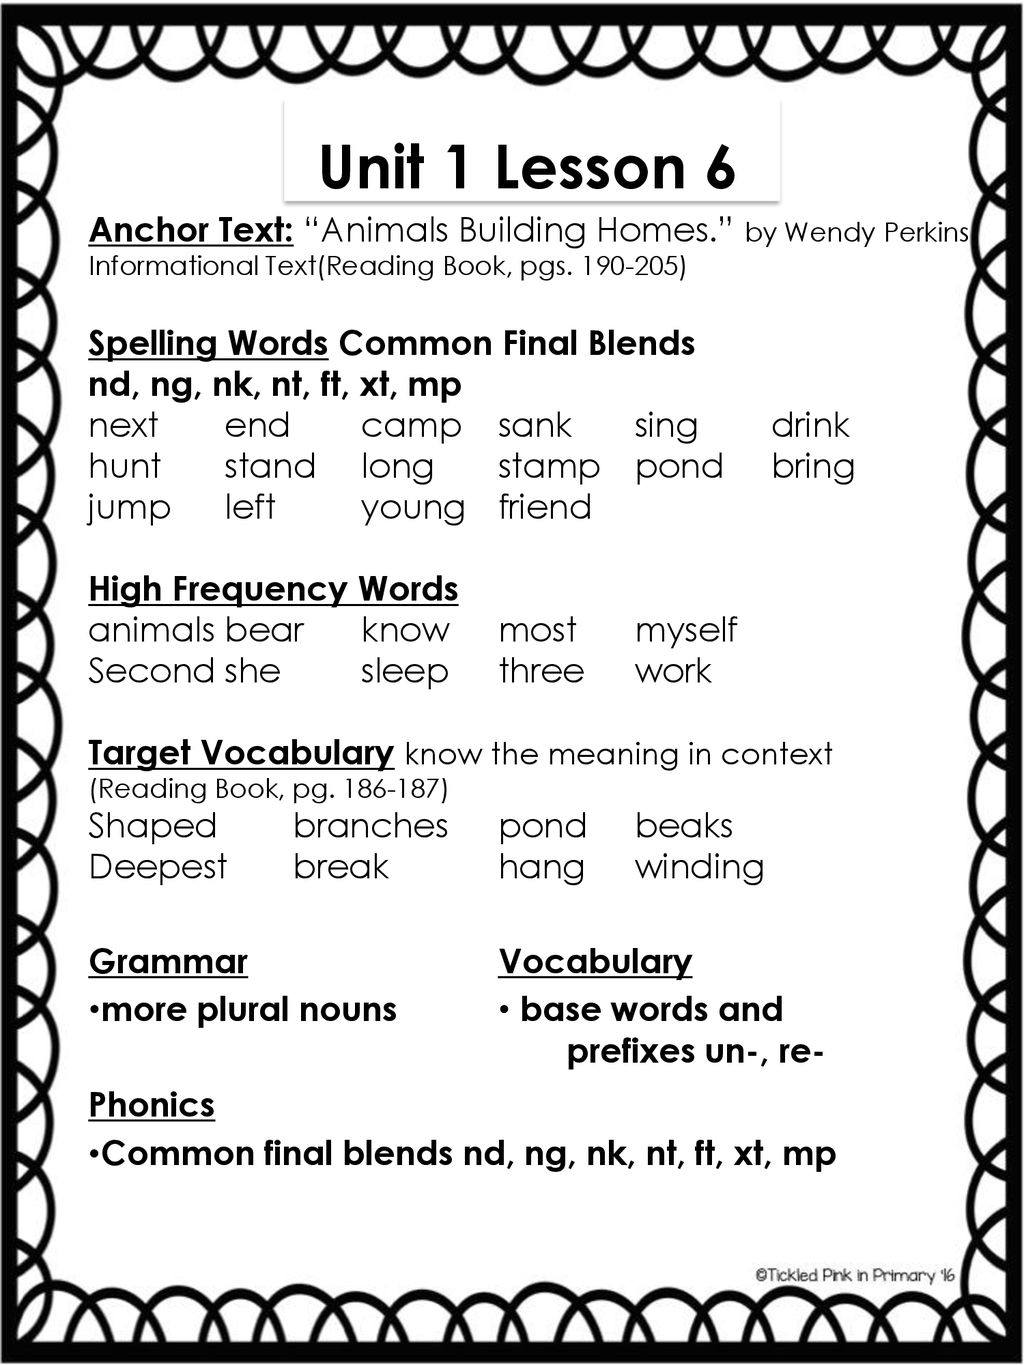 Unit 1 Lesson 6 Anchor Text: “Animals Building Homes.” by Wendy Perkins  Informational Text(Reading Book, pgs ) Spelling Words Common Final Blends.  - ppt download